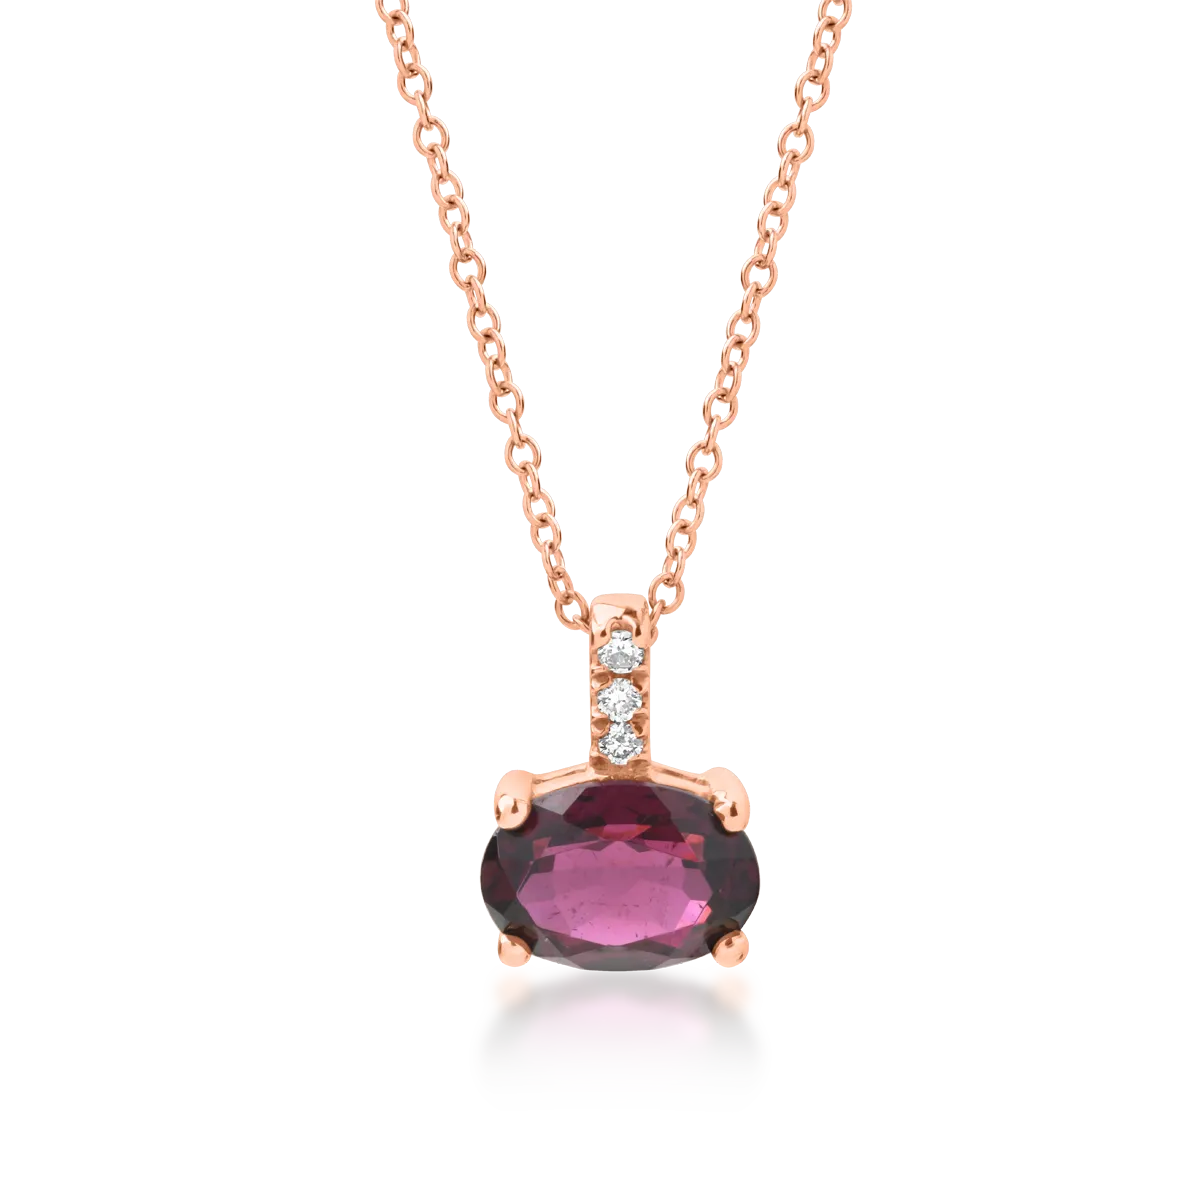 18K rose gold pendant necklace with 1.03ct garnet and 0.019ct diamonds